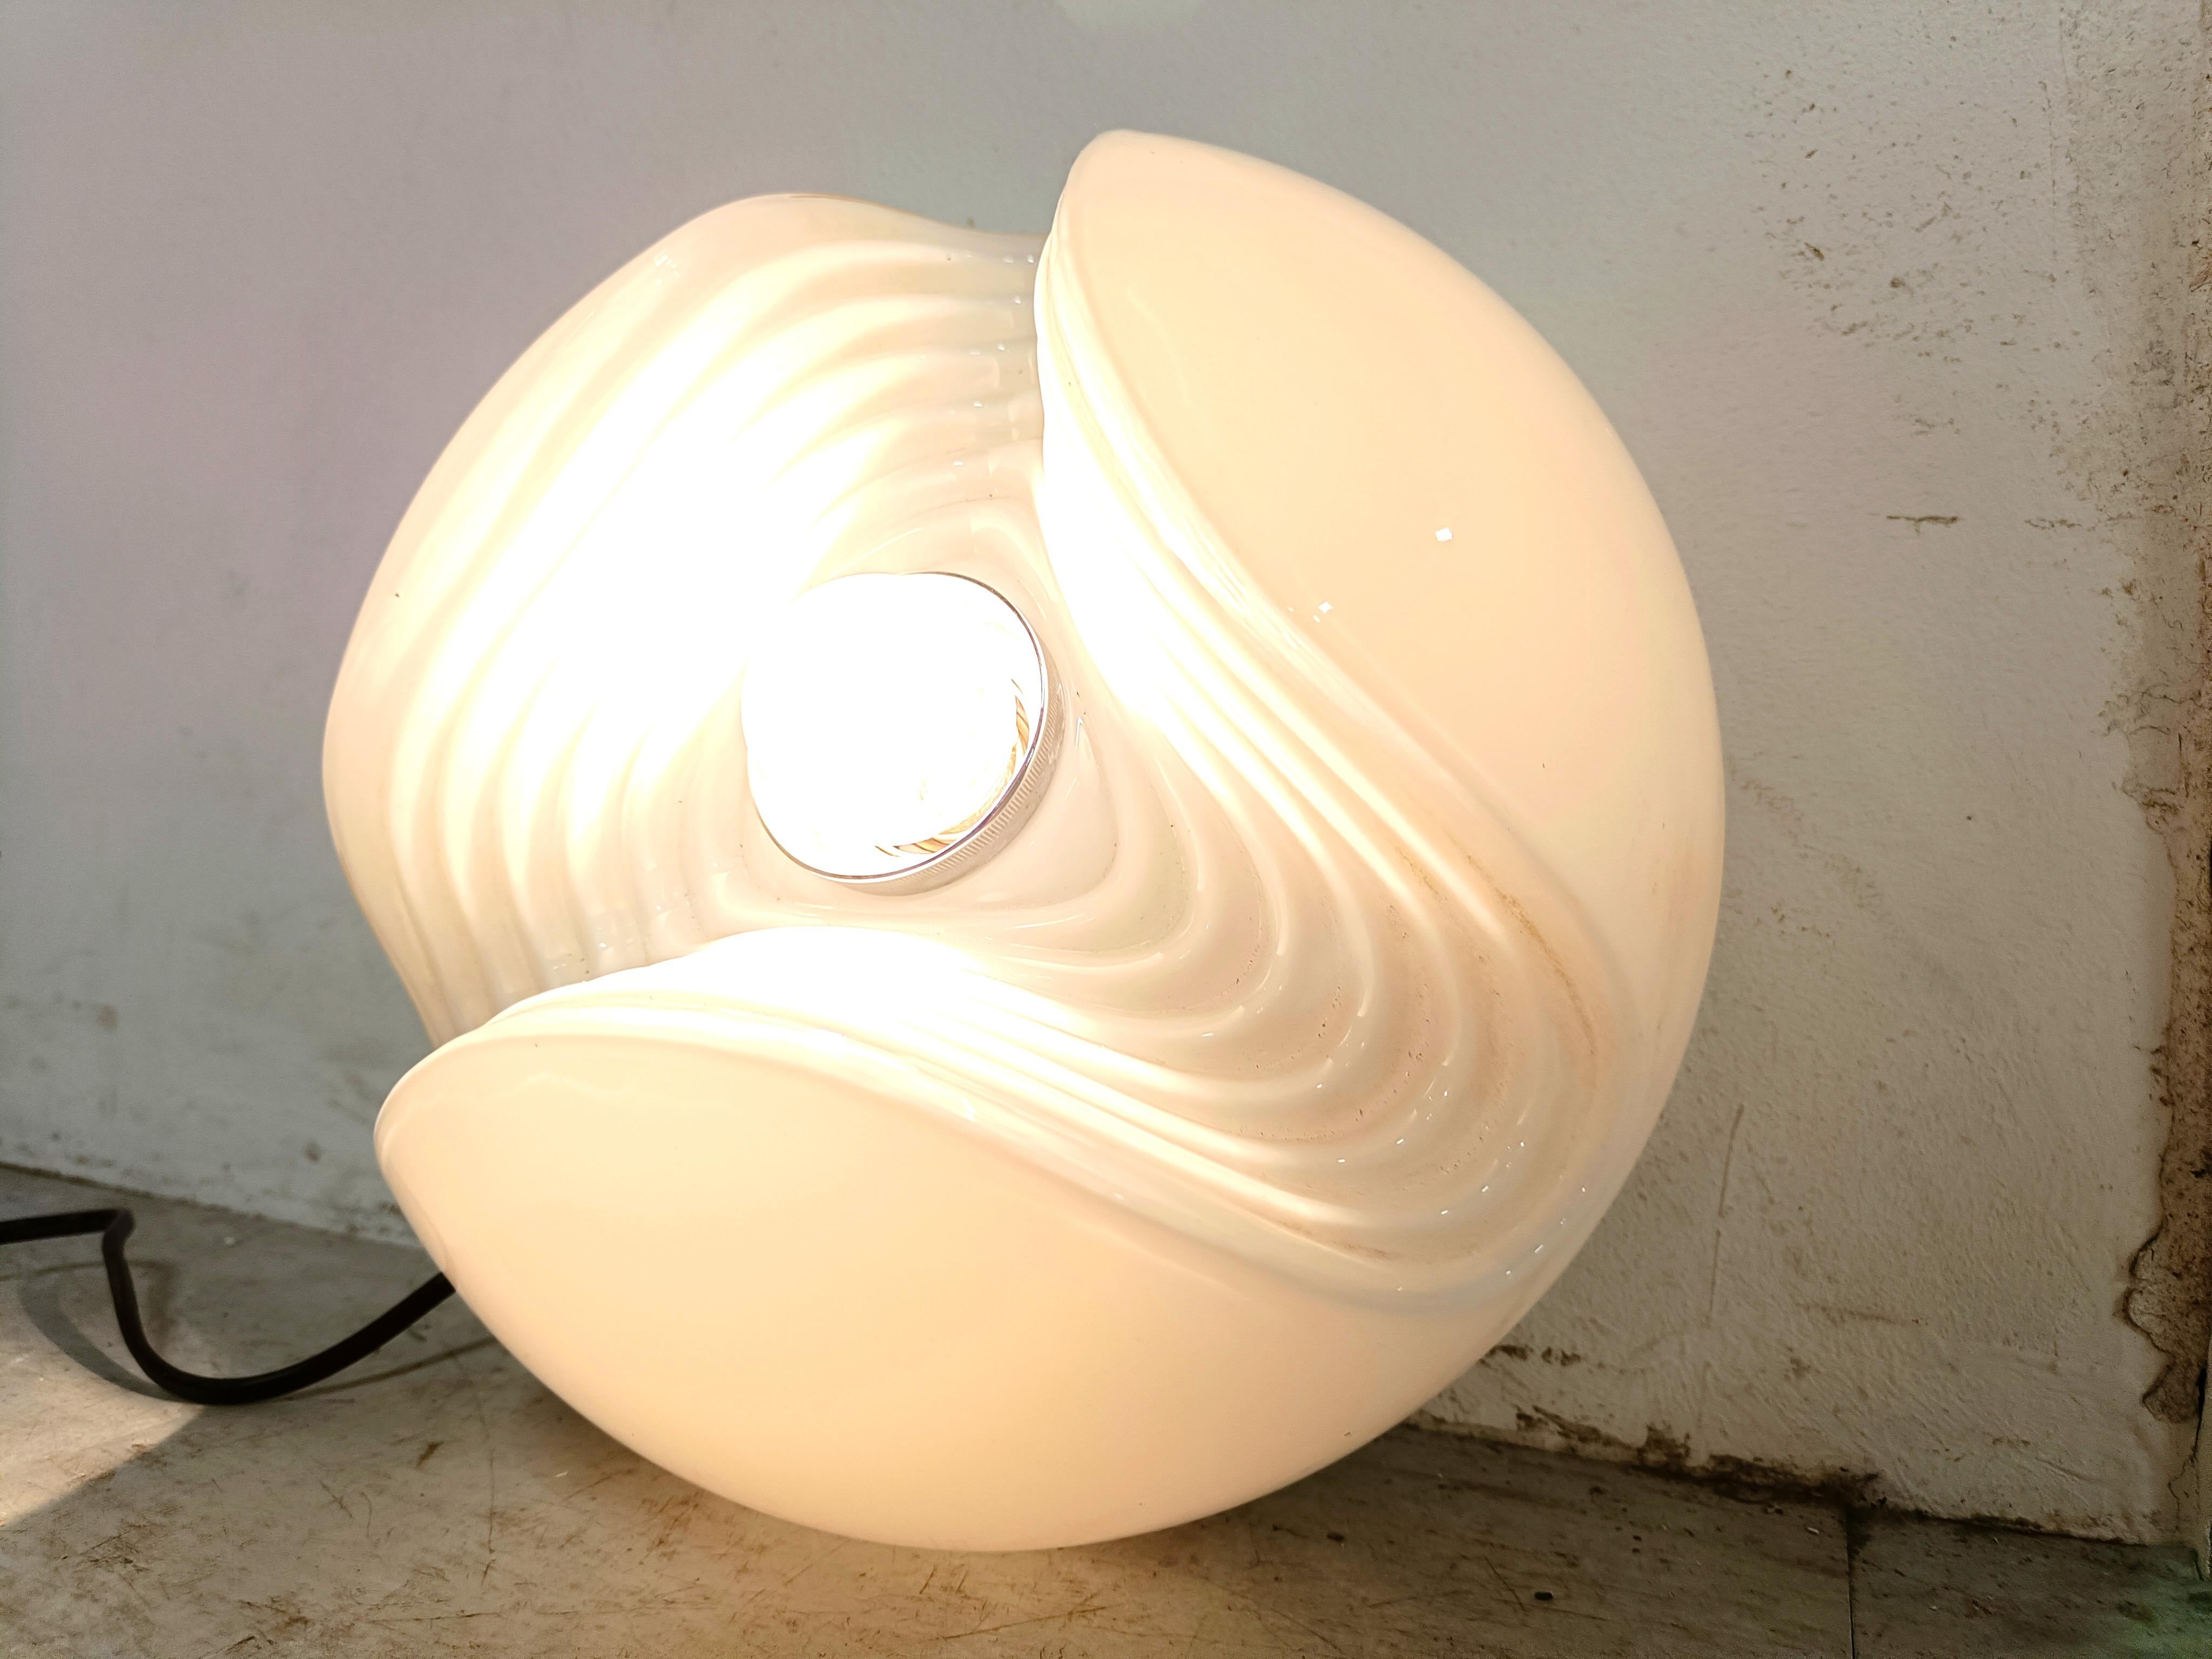 Vintage glass wall light or table lamp by Peil and Putzler.

The lamp emits a beautiful diverted light thanks to its carefully designed glass.

Works with a regular E26/E27 light bulb, US compatible.

1980s - Germany

Dimensions:
Height: